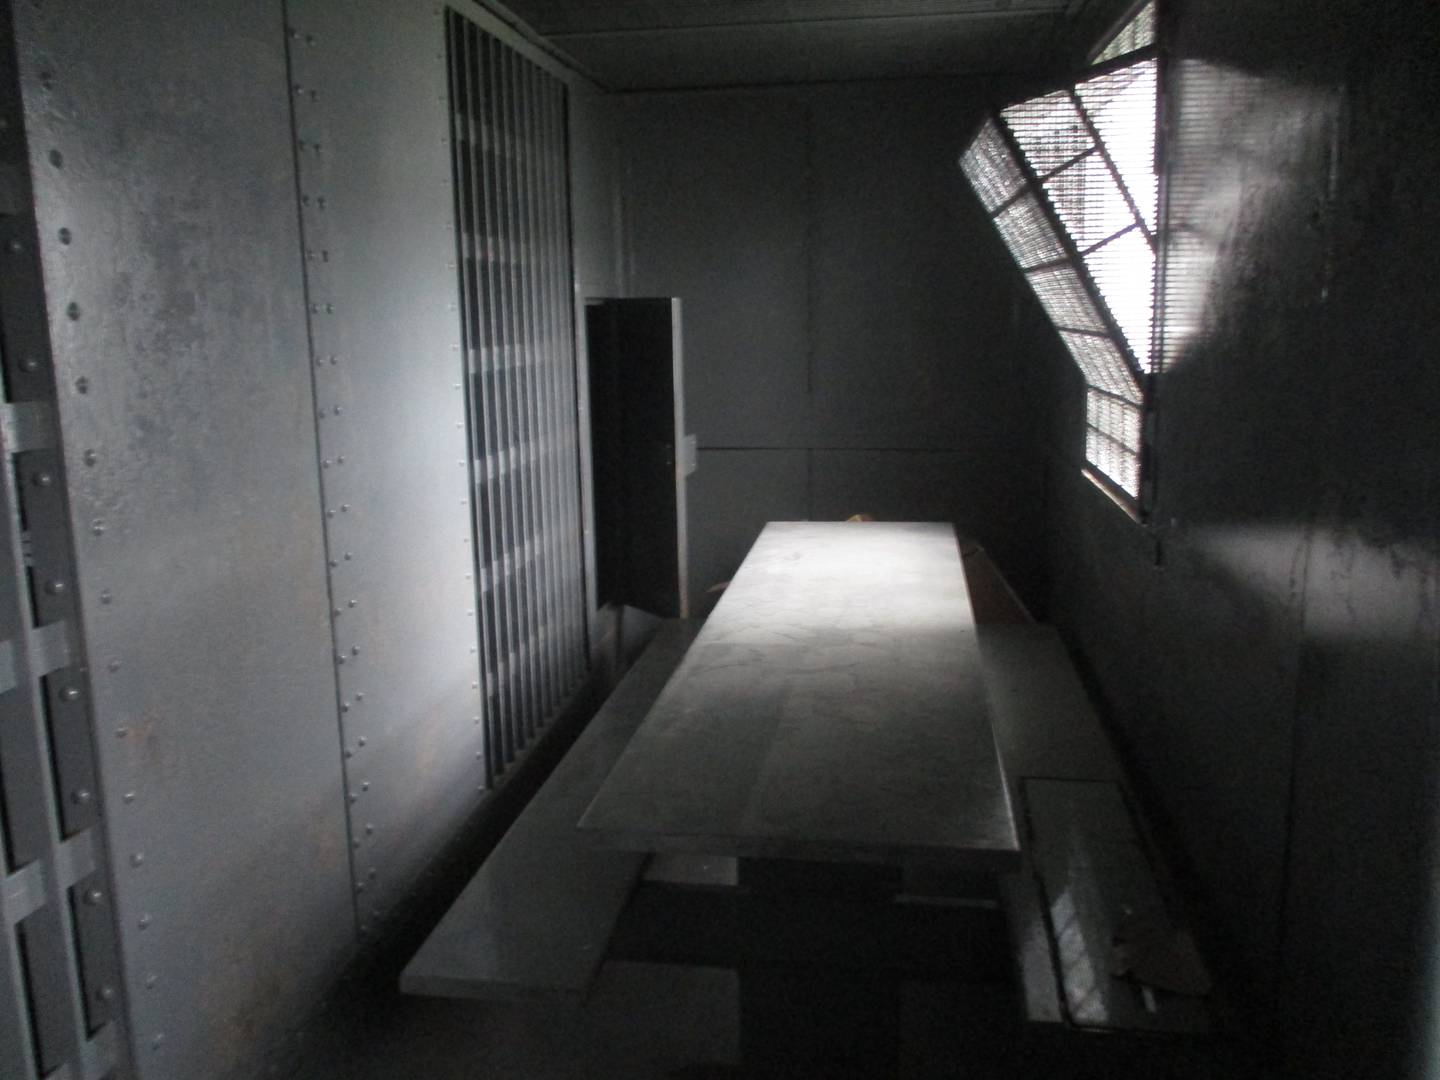 Not much light gets inside the old Kendall County jail in Yorkville. (Mark Foster -- mfoster@shawmedia.com)